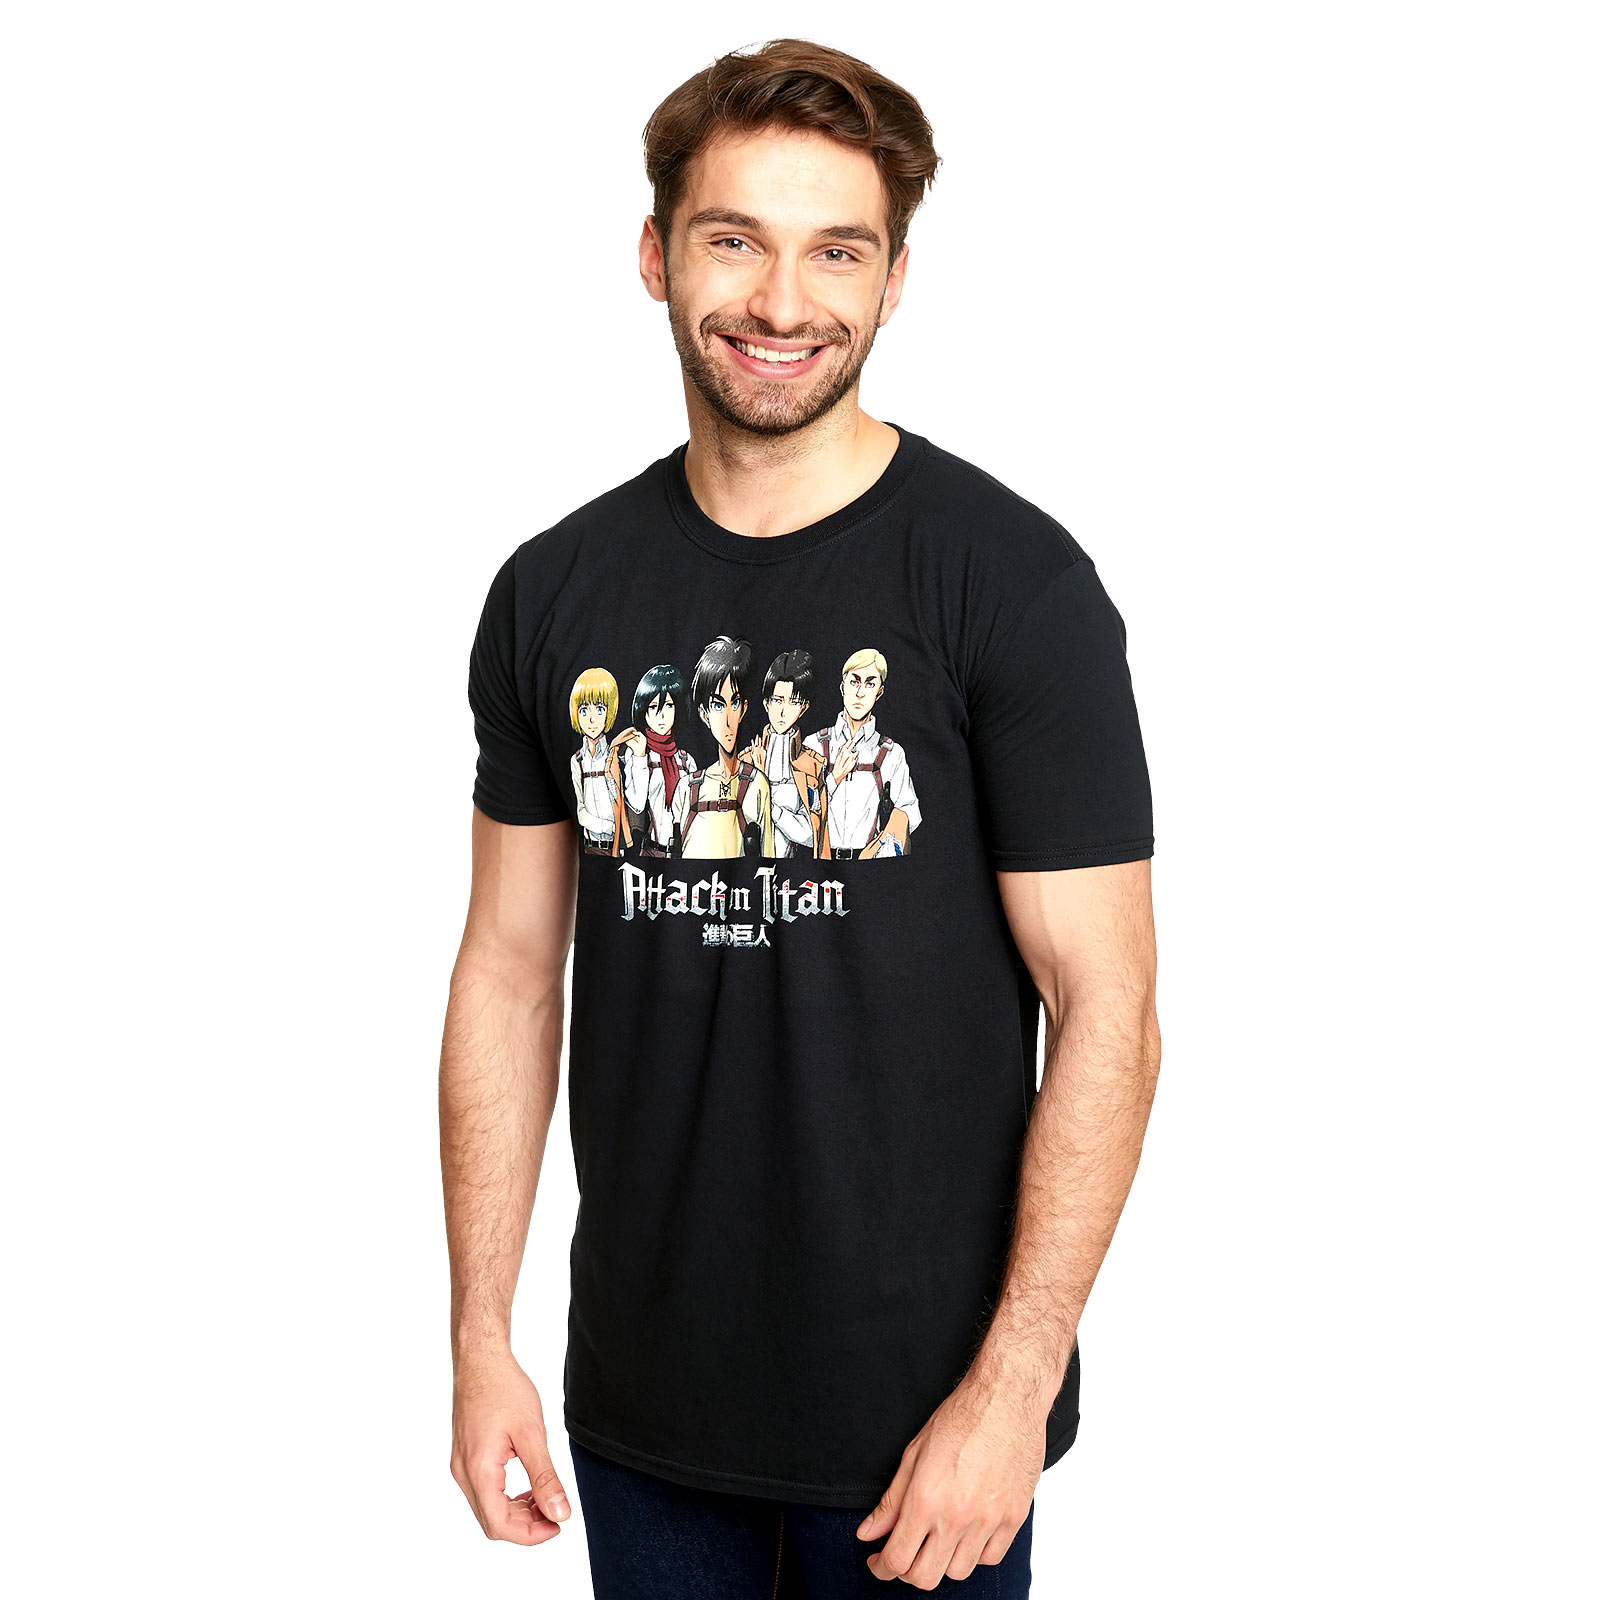 Attack on Titan - Group T-Shirt